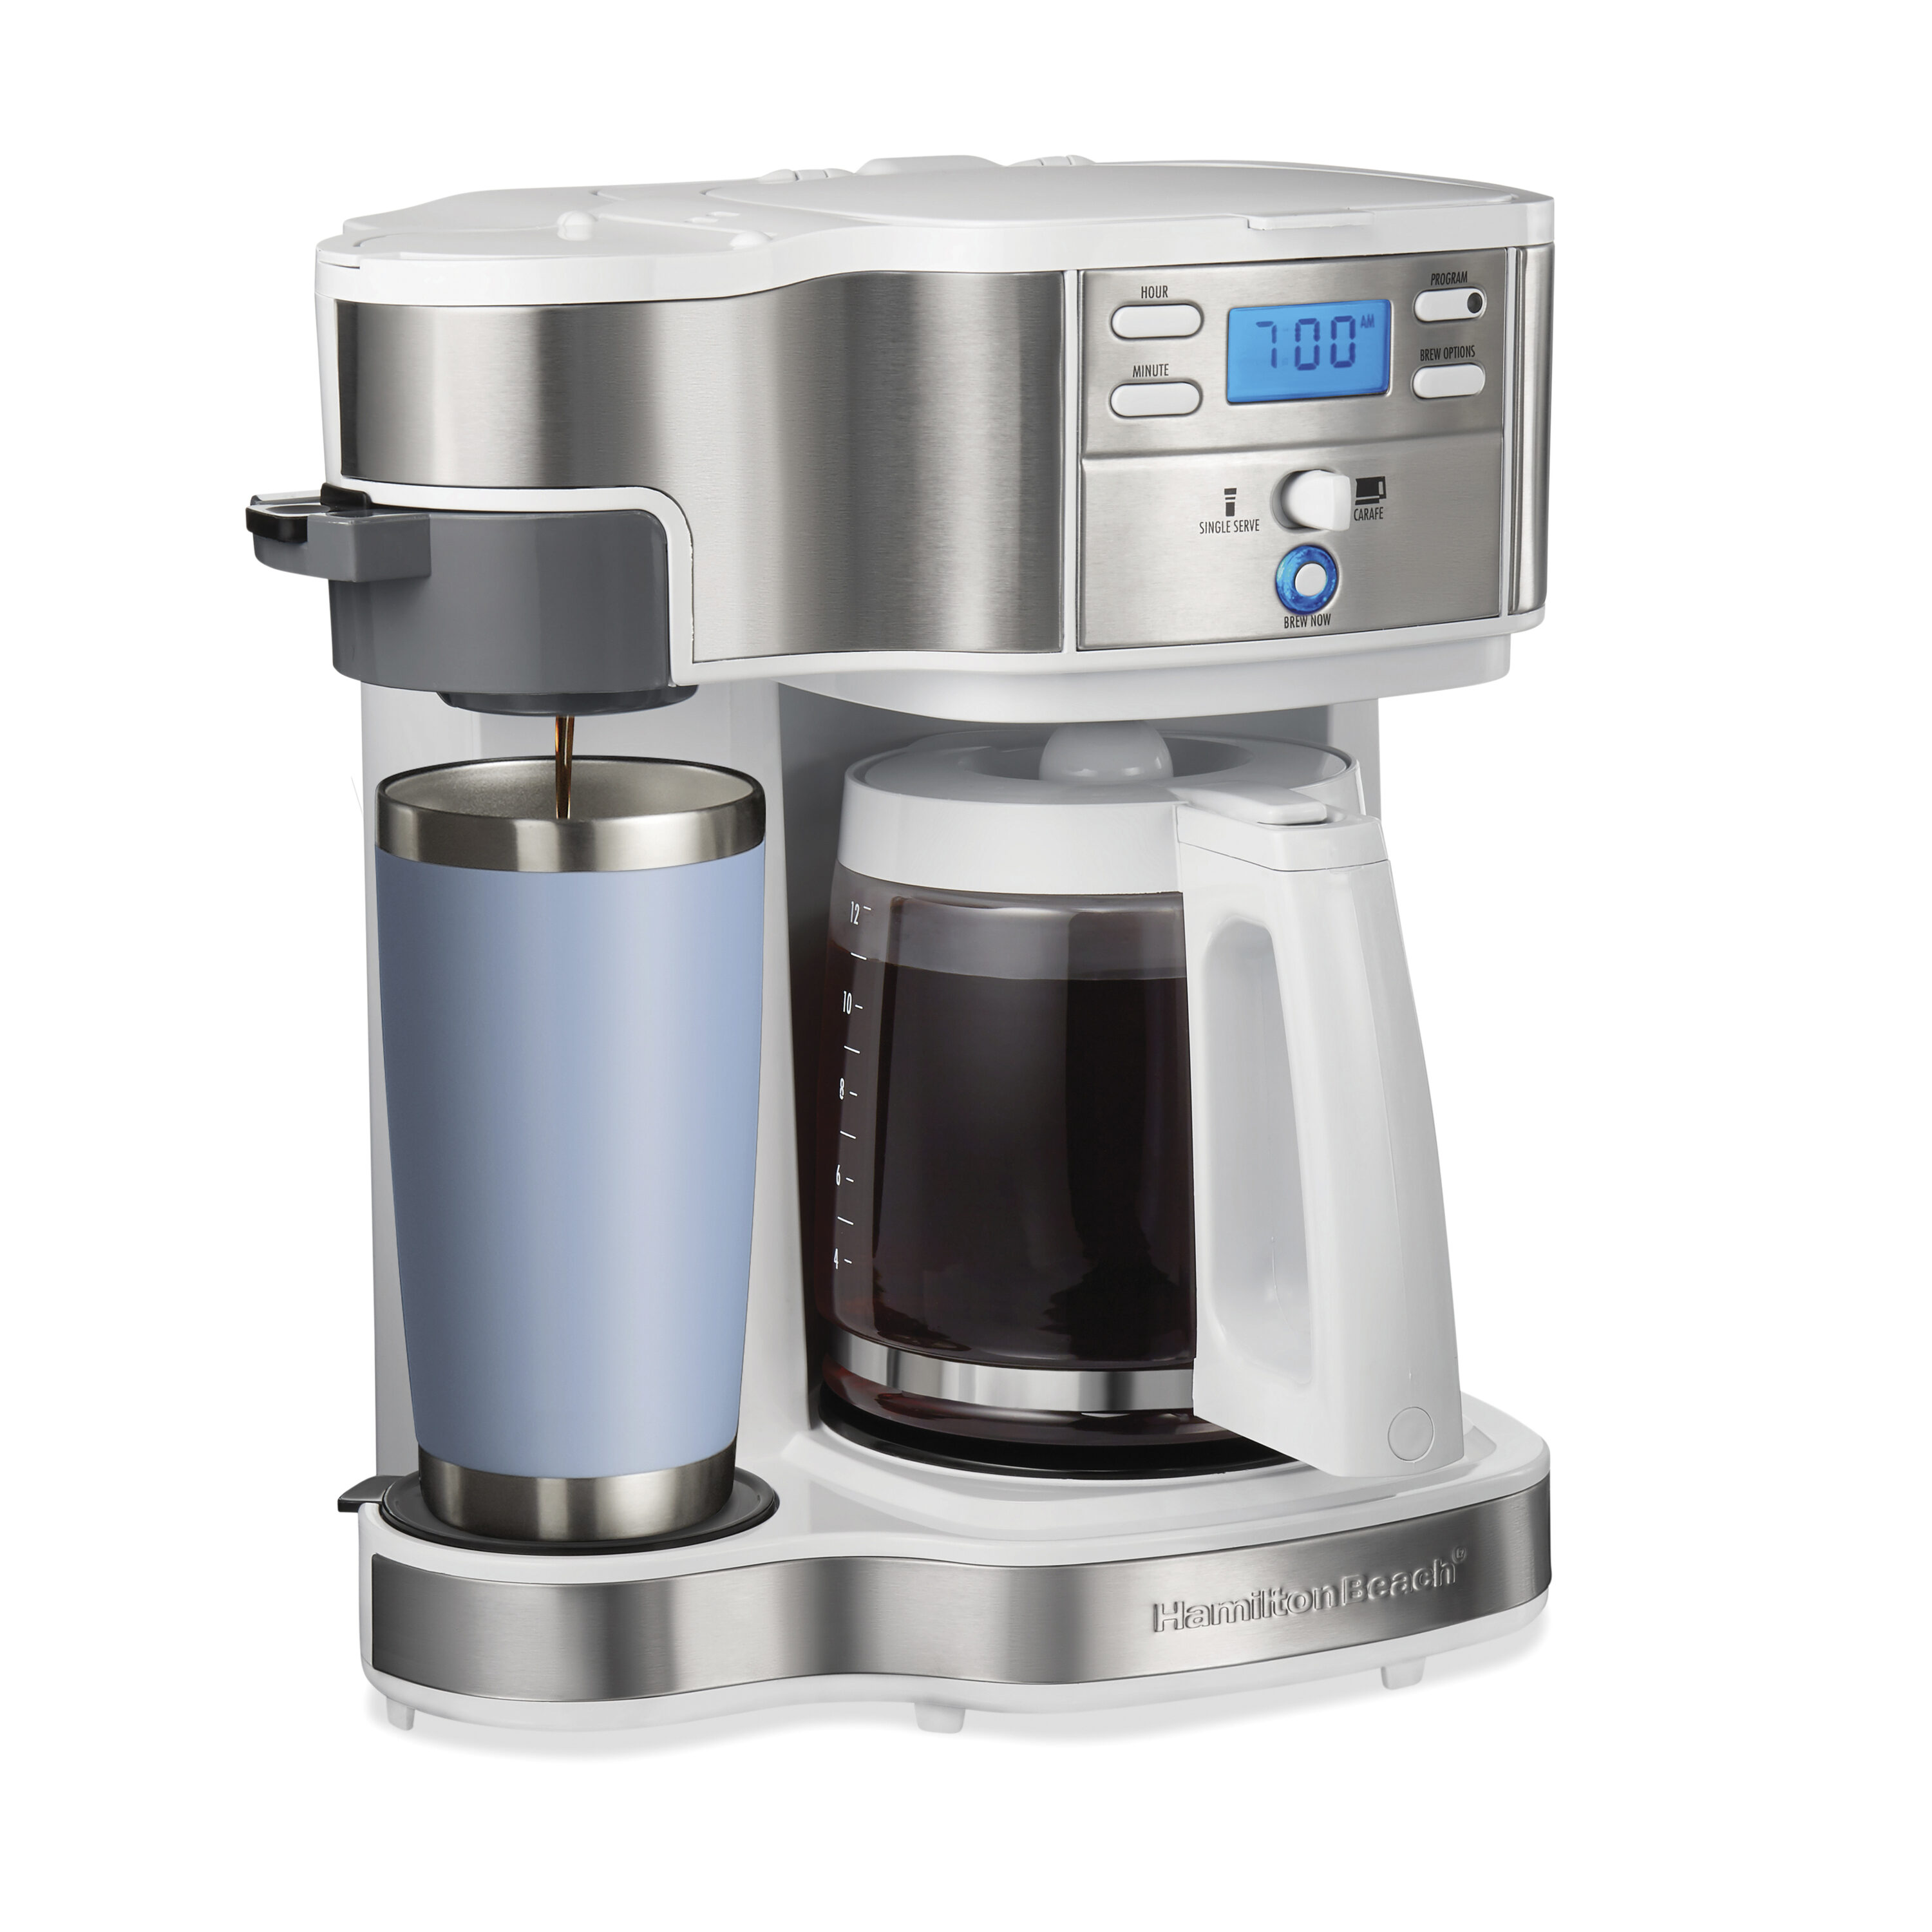 Hamilton Beach 12 Cup Programmable Drip Coffee Maker with 3 Brew